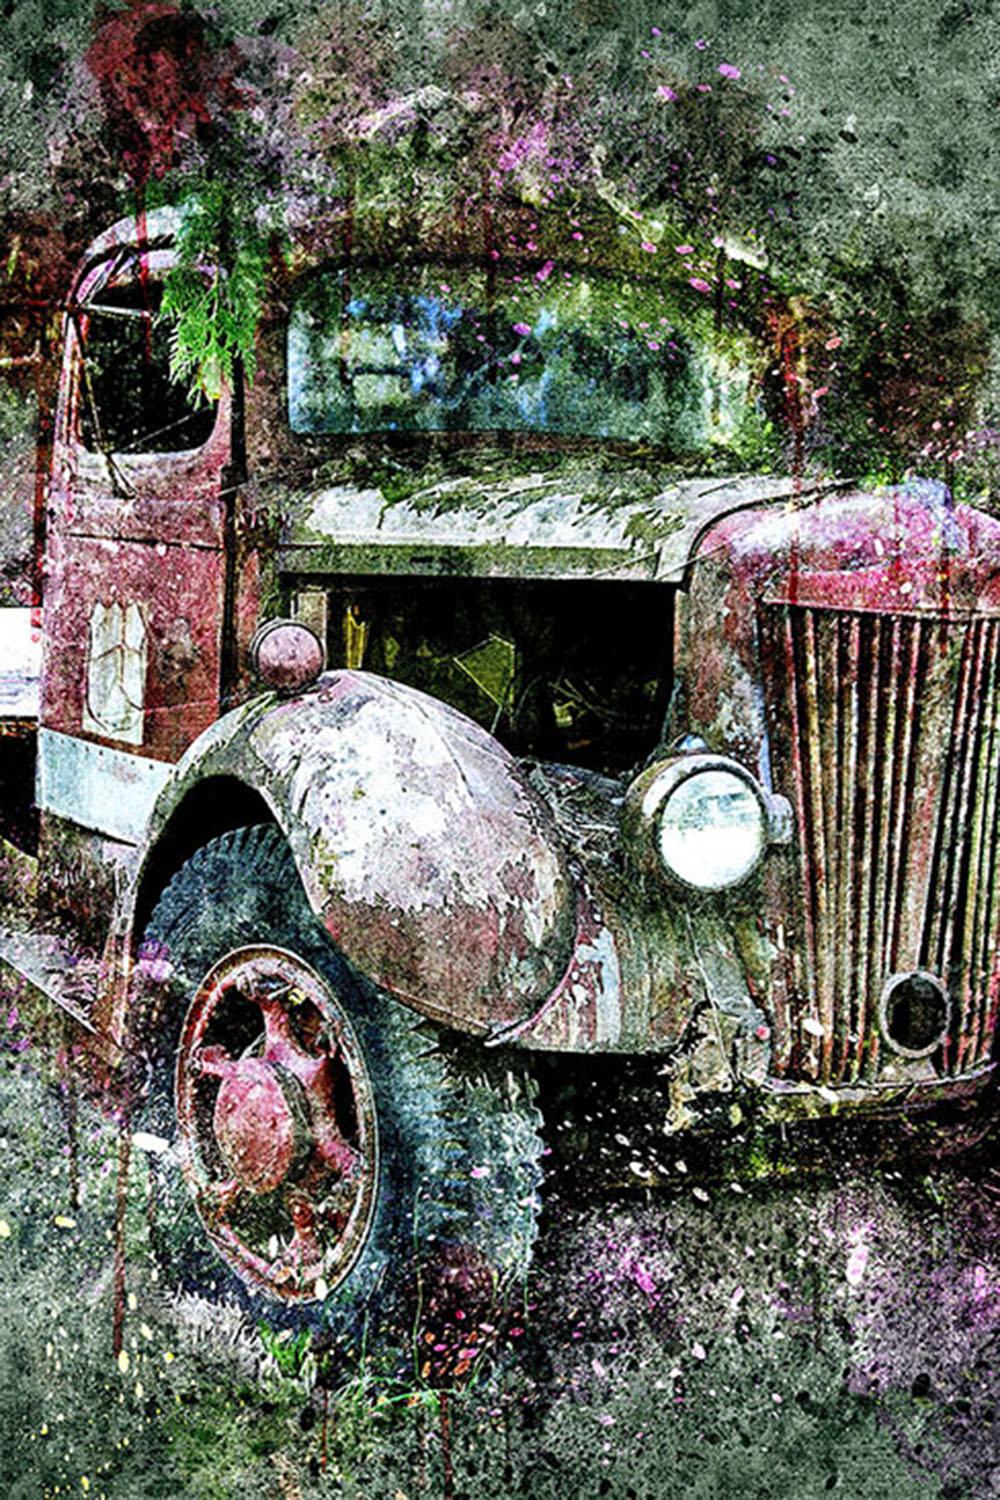 Bundle of 12 Old Trucks HQ Graphics with Grunge Style pinterest image.